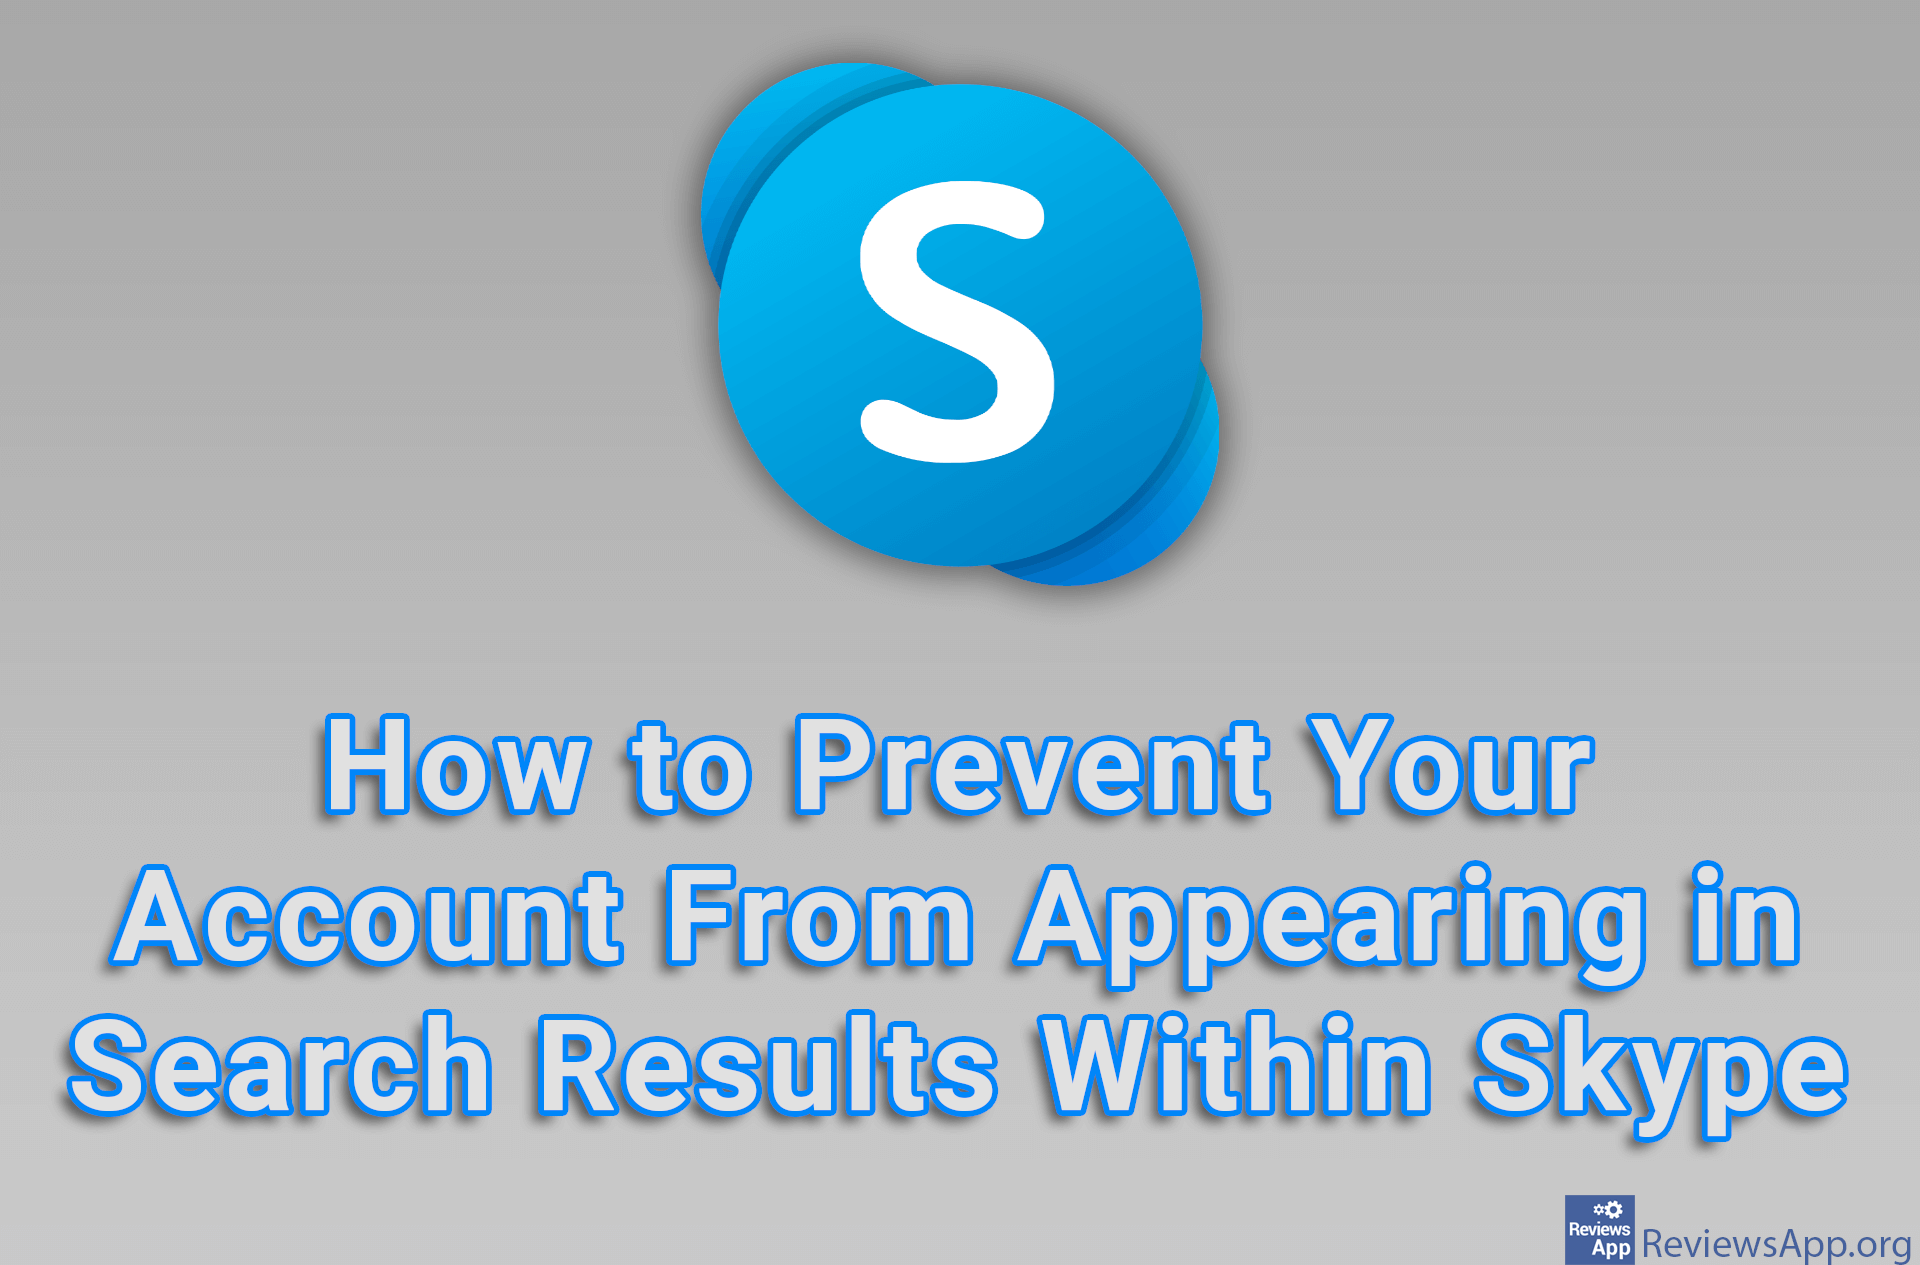 How to Prevent Your Account From Appearing in Search Results Within Skype